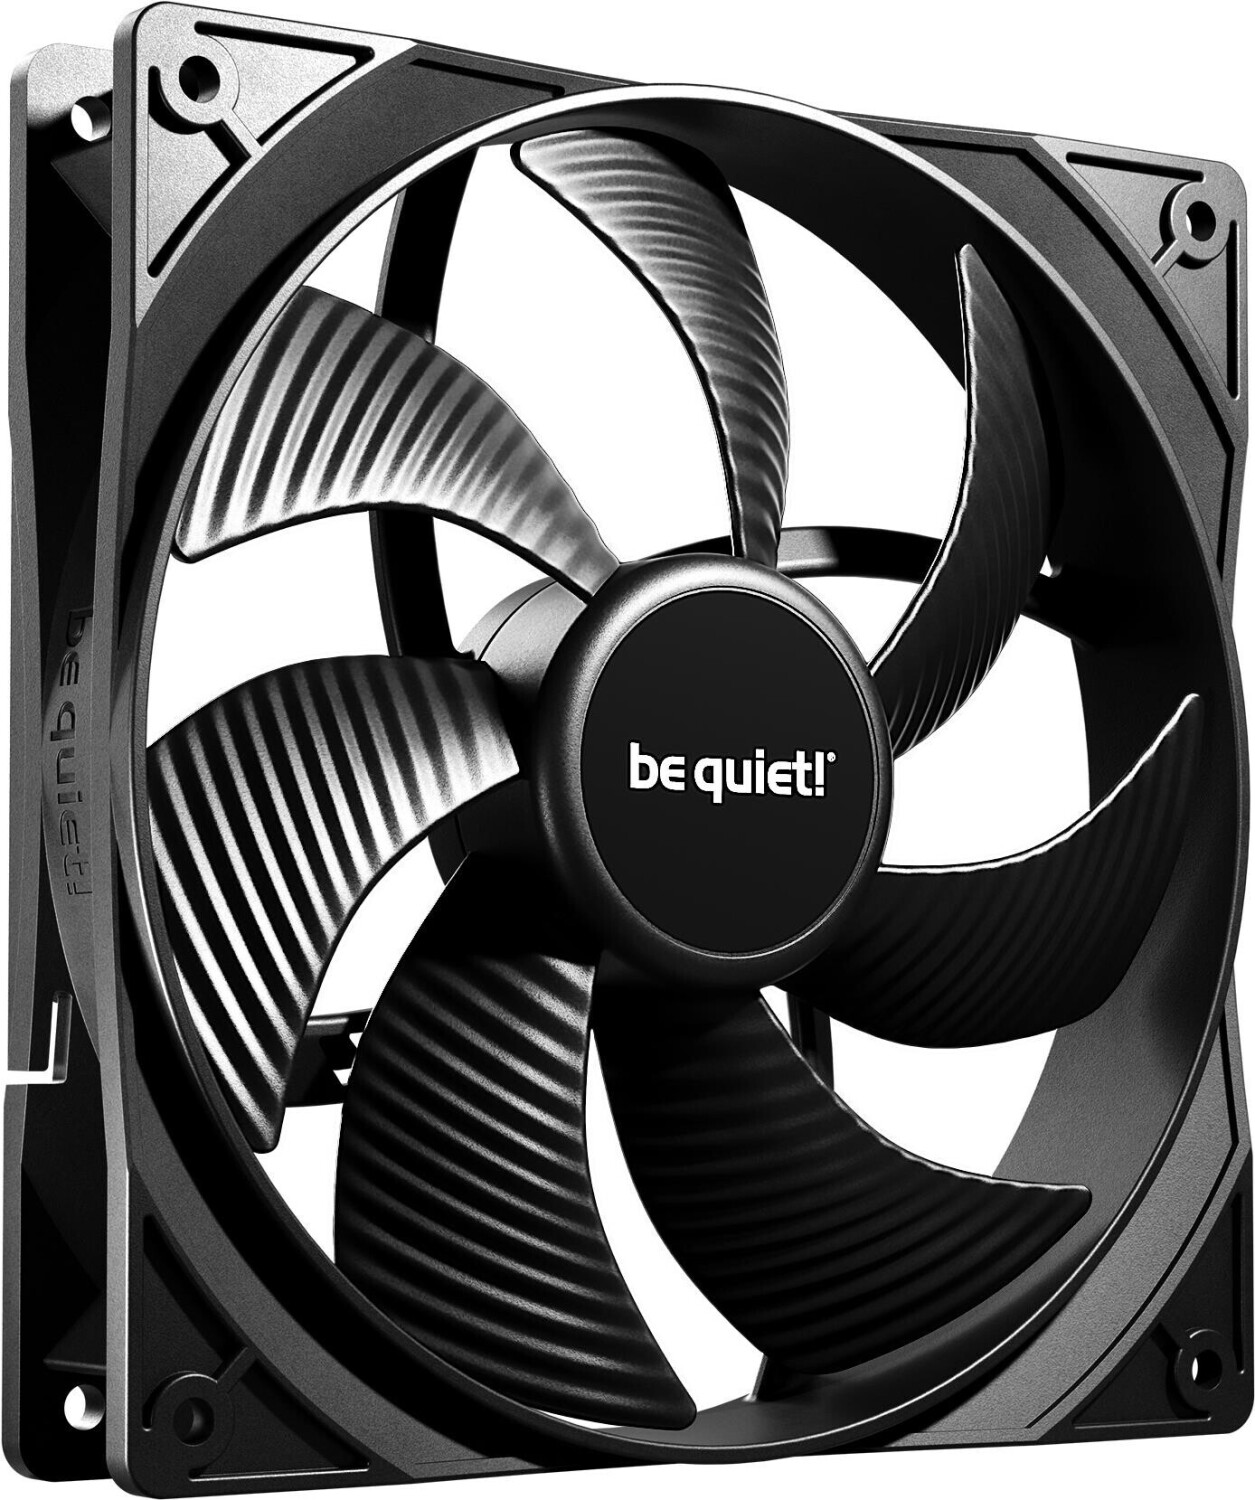 Be quiet! Pure wings 2 140mm pwm high-speed boitier pc ventilateur